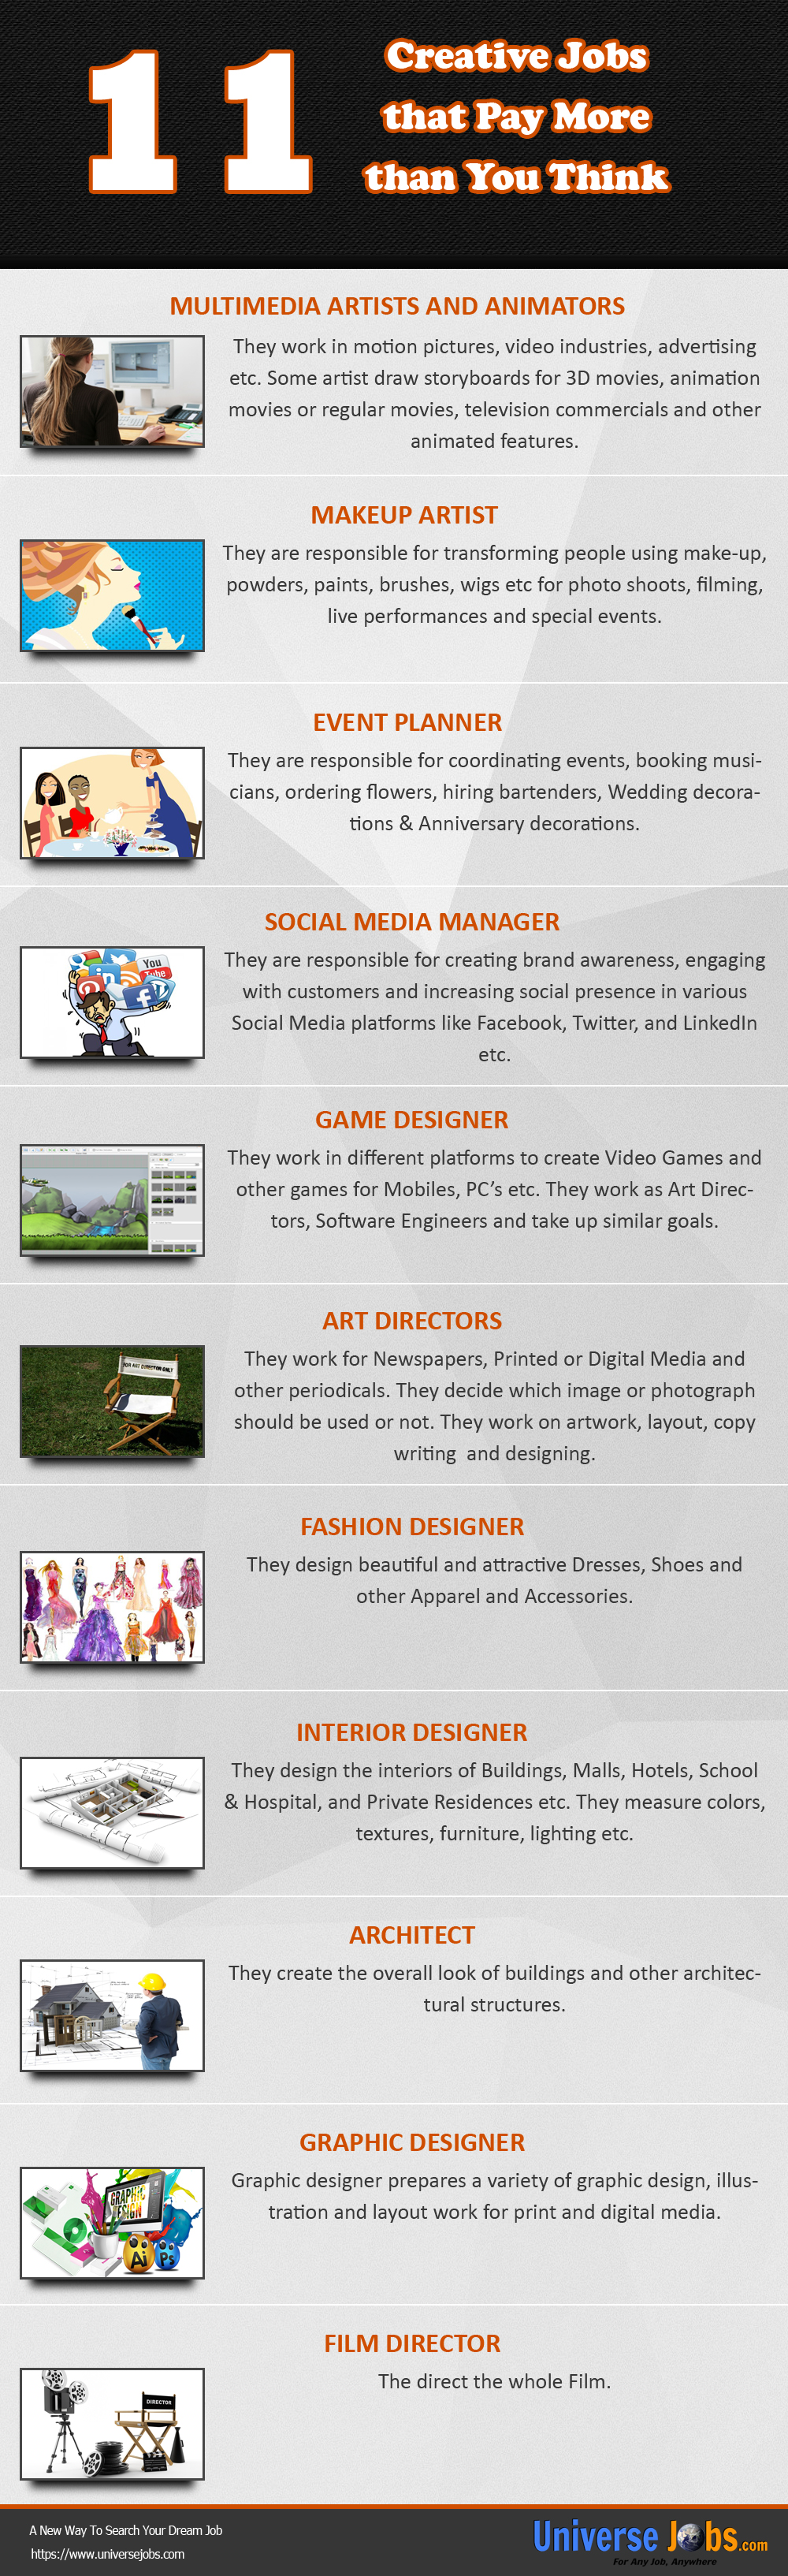 11-Creative-Jobs-that-Pay-More-than-You-Think-Info-Graphics